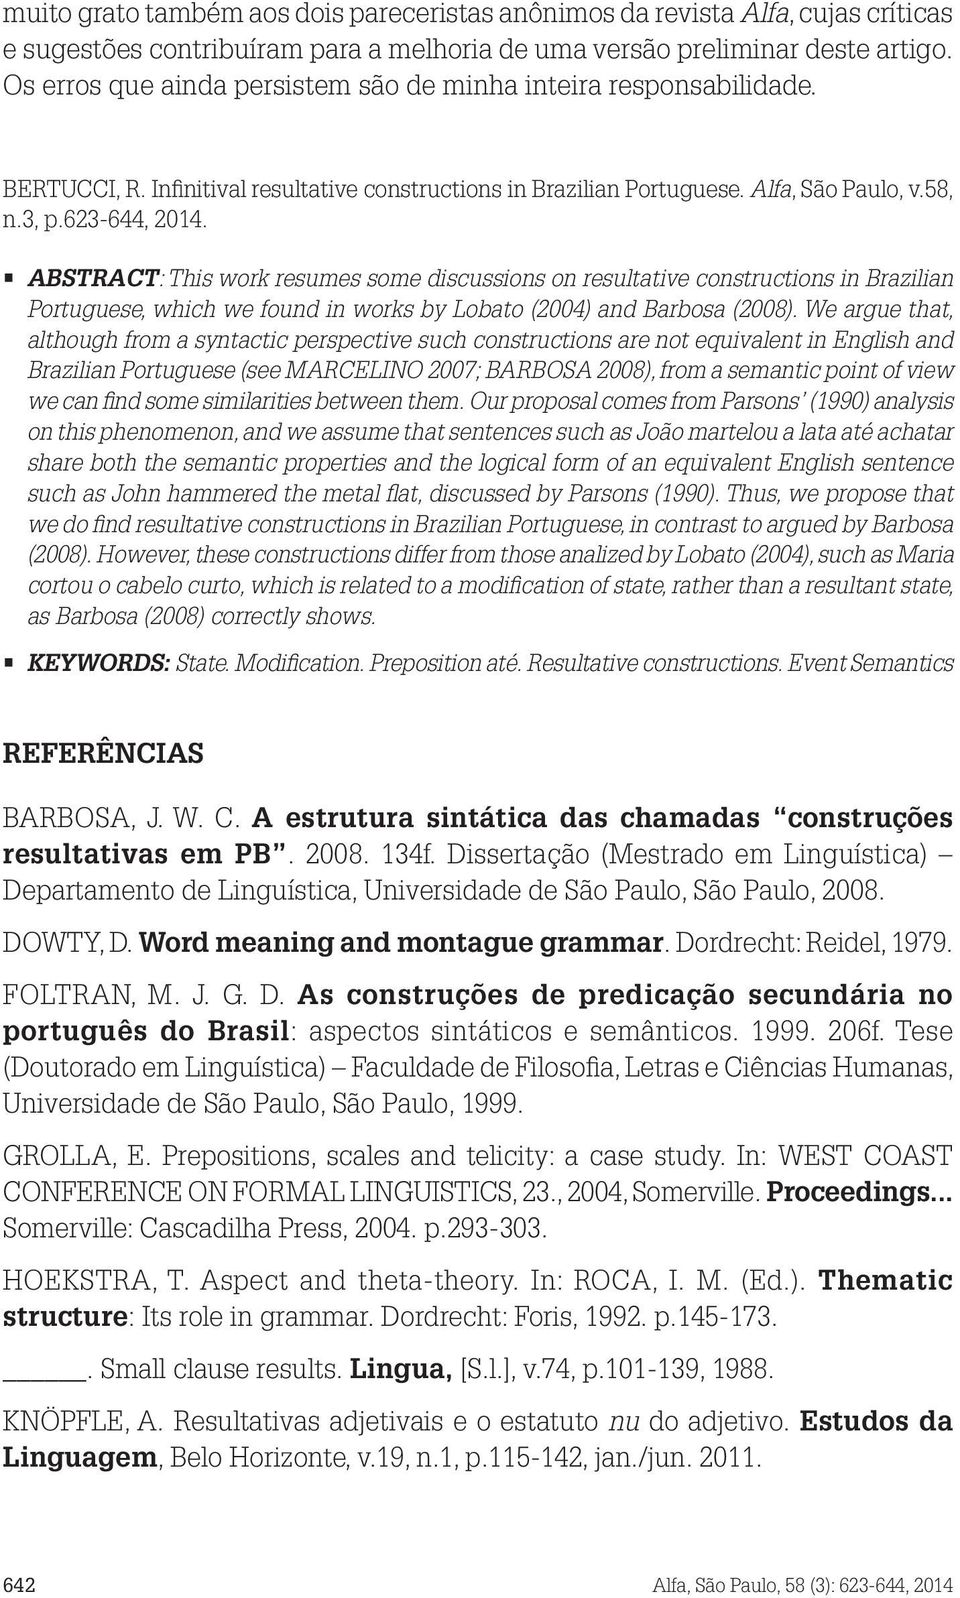 ABSTRACT: This work resumes some discussions on resultative constructions in Brazilian Portuguese, which we found in works by Lobato (2004) and Barbosa (2008).